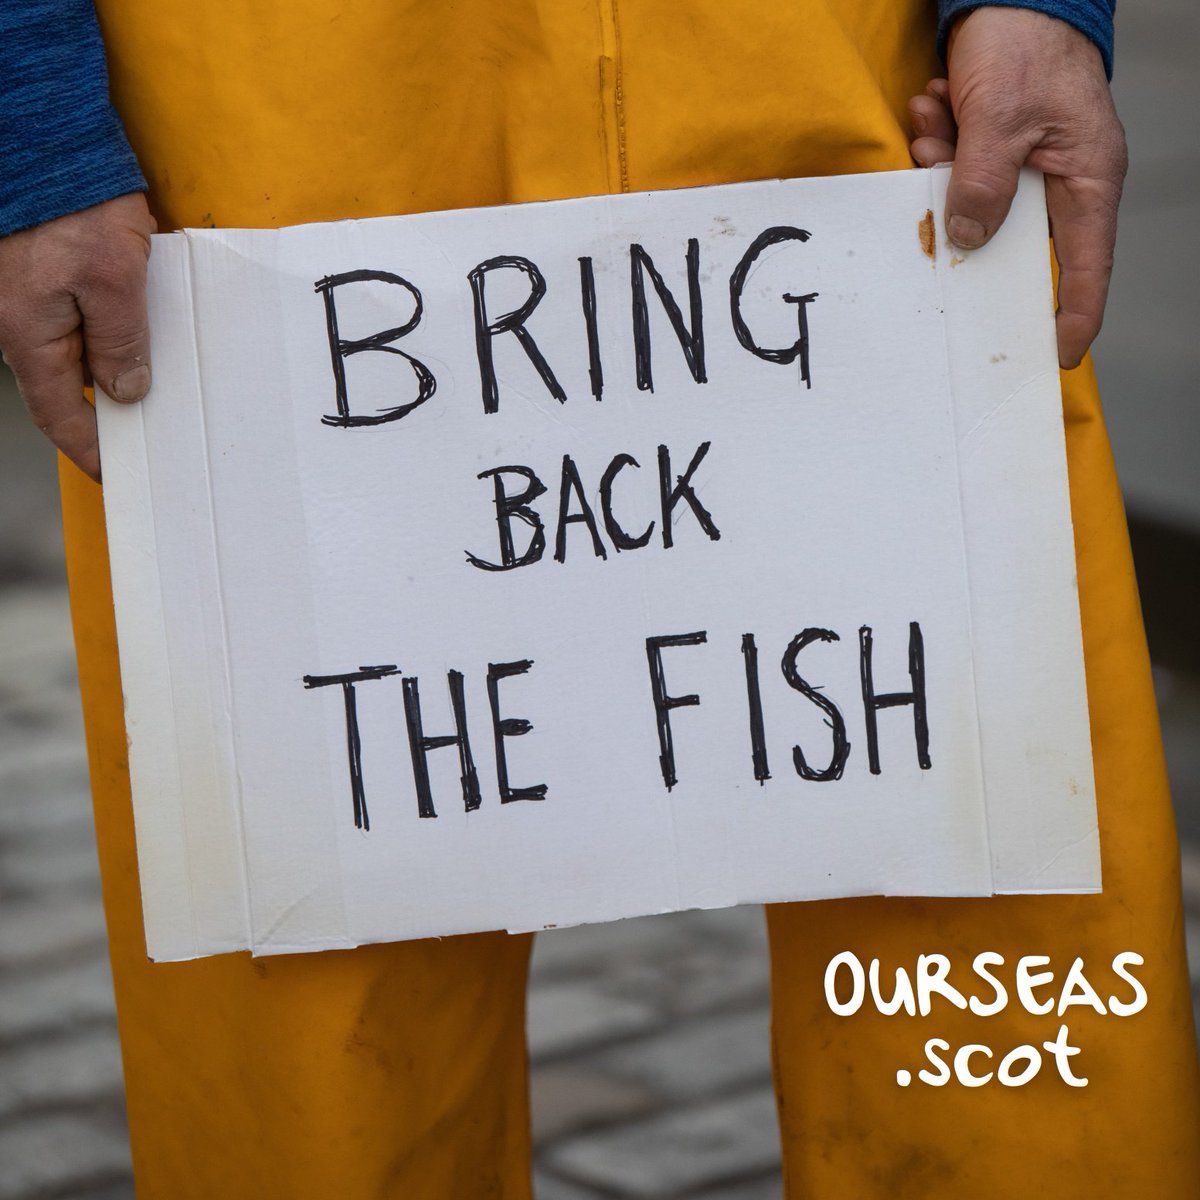 Scotland used to have a limit on destructive bottom-trawling which safeguarded vital habitats & low-impact fishing within three miles of the shore. It's time to #BringBacktheFish. Sign the @ourseas_scot petition: bit.ly/inshorelimit